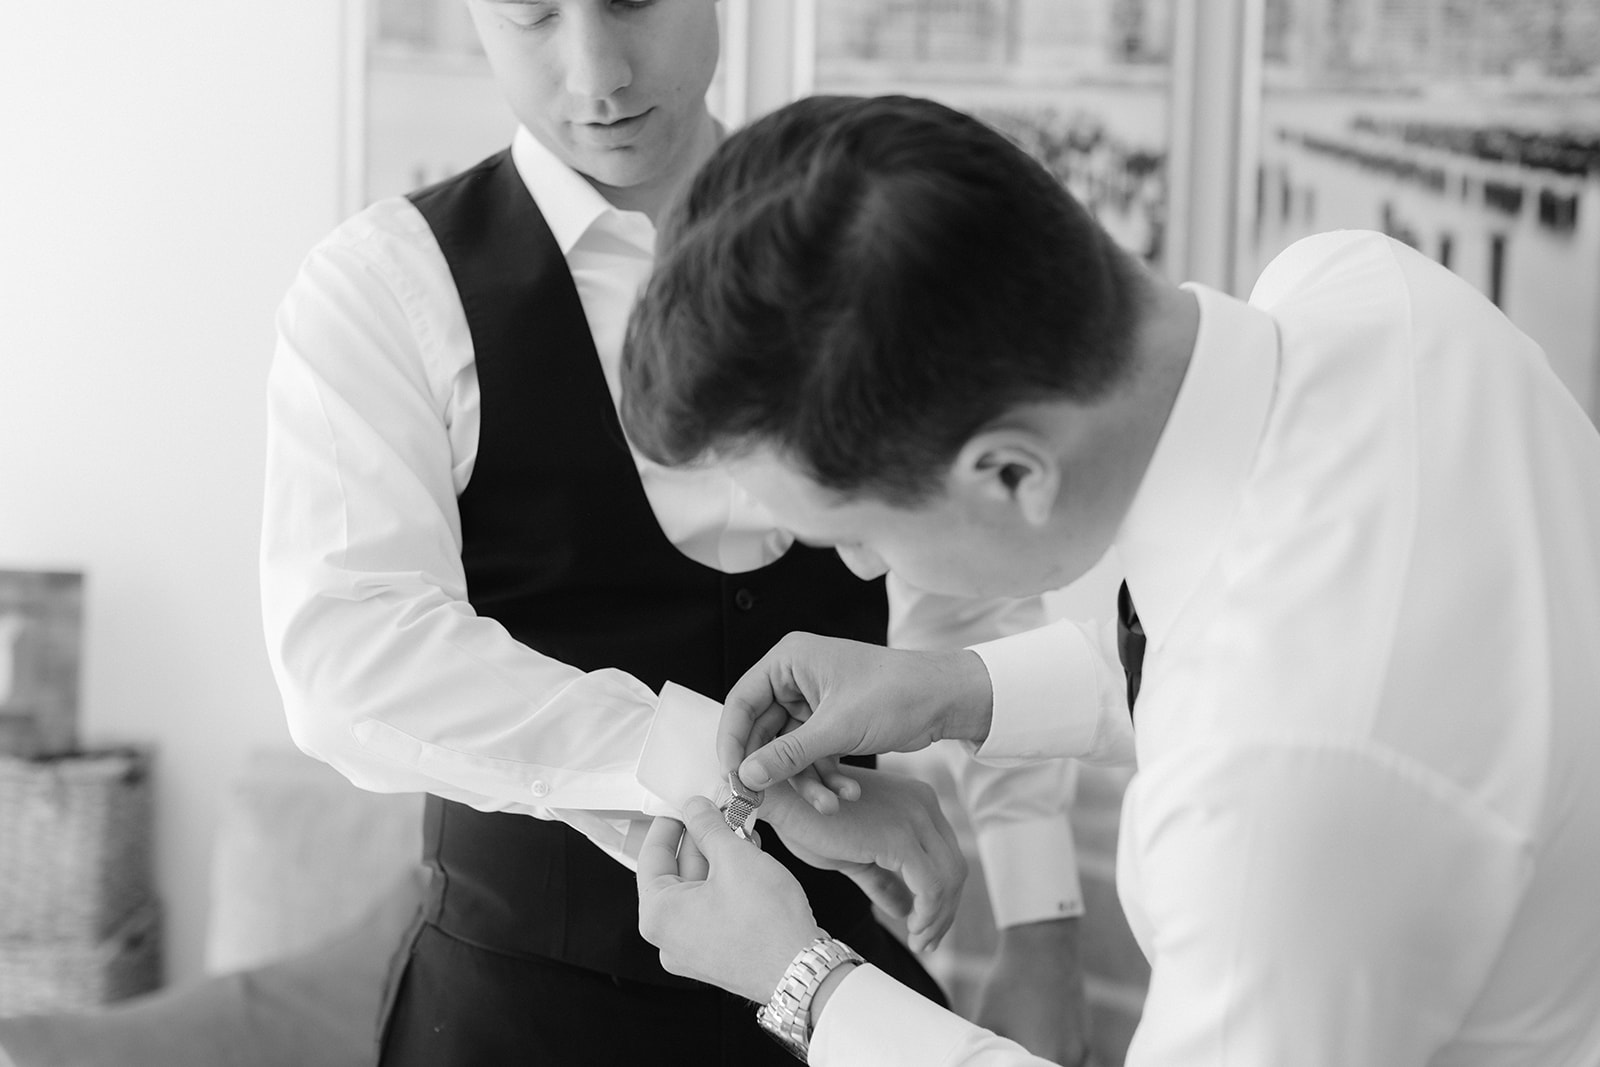 Groomsman assist the groom with cuff links while getting ready.